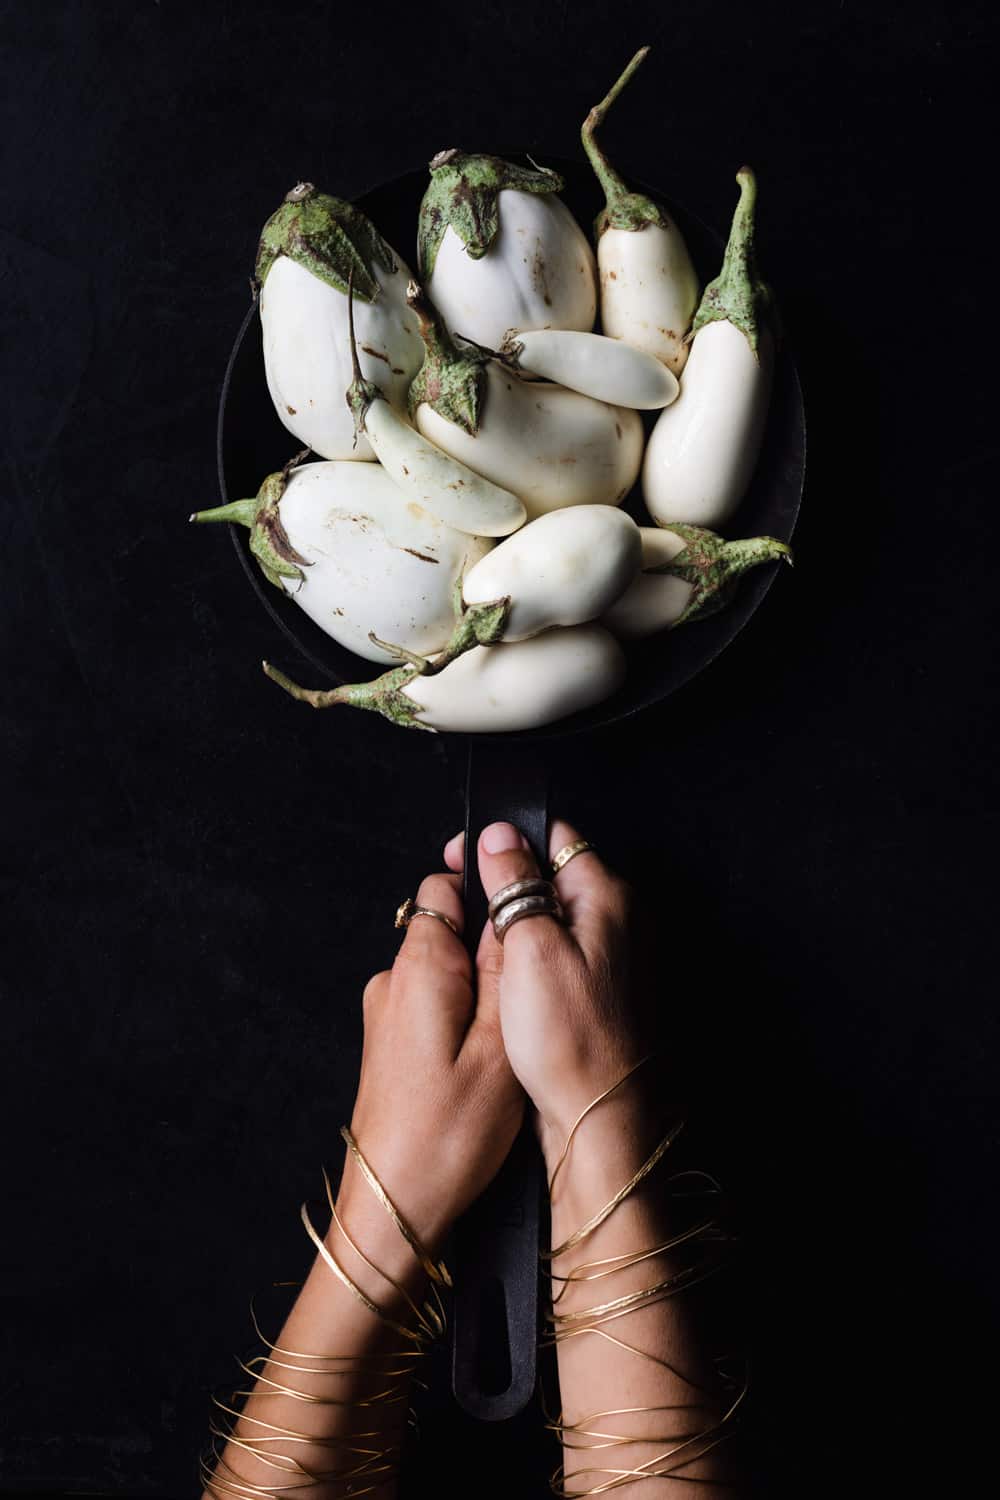 A cast iron skillet filled with different varieties of white eggplants, carried by Daniela Gerson wearing jewelry on a black background.